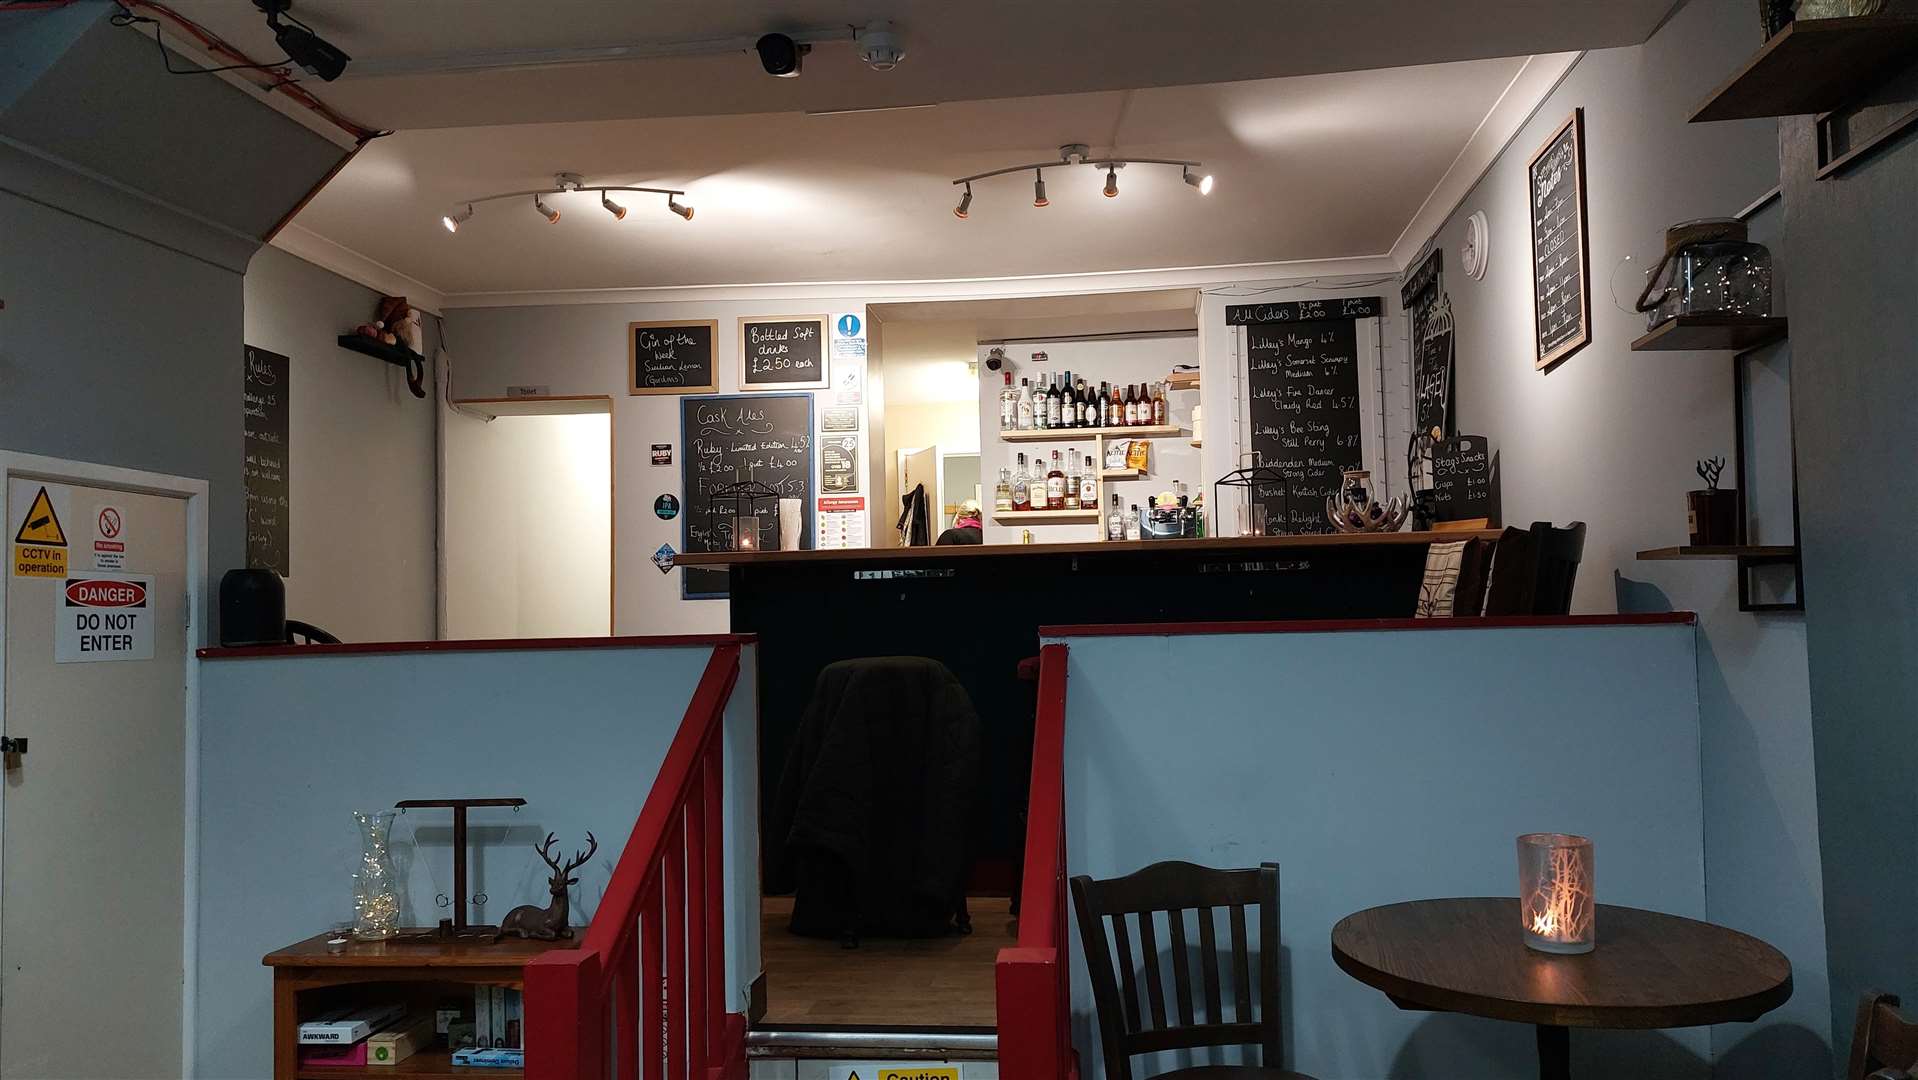 The pair have modelled the space on their ideal pub